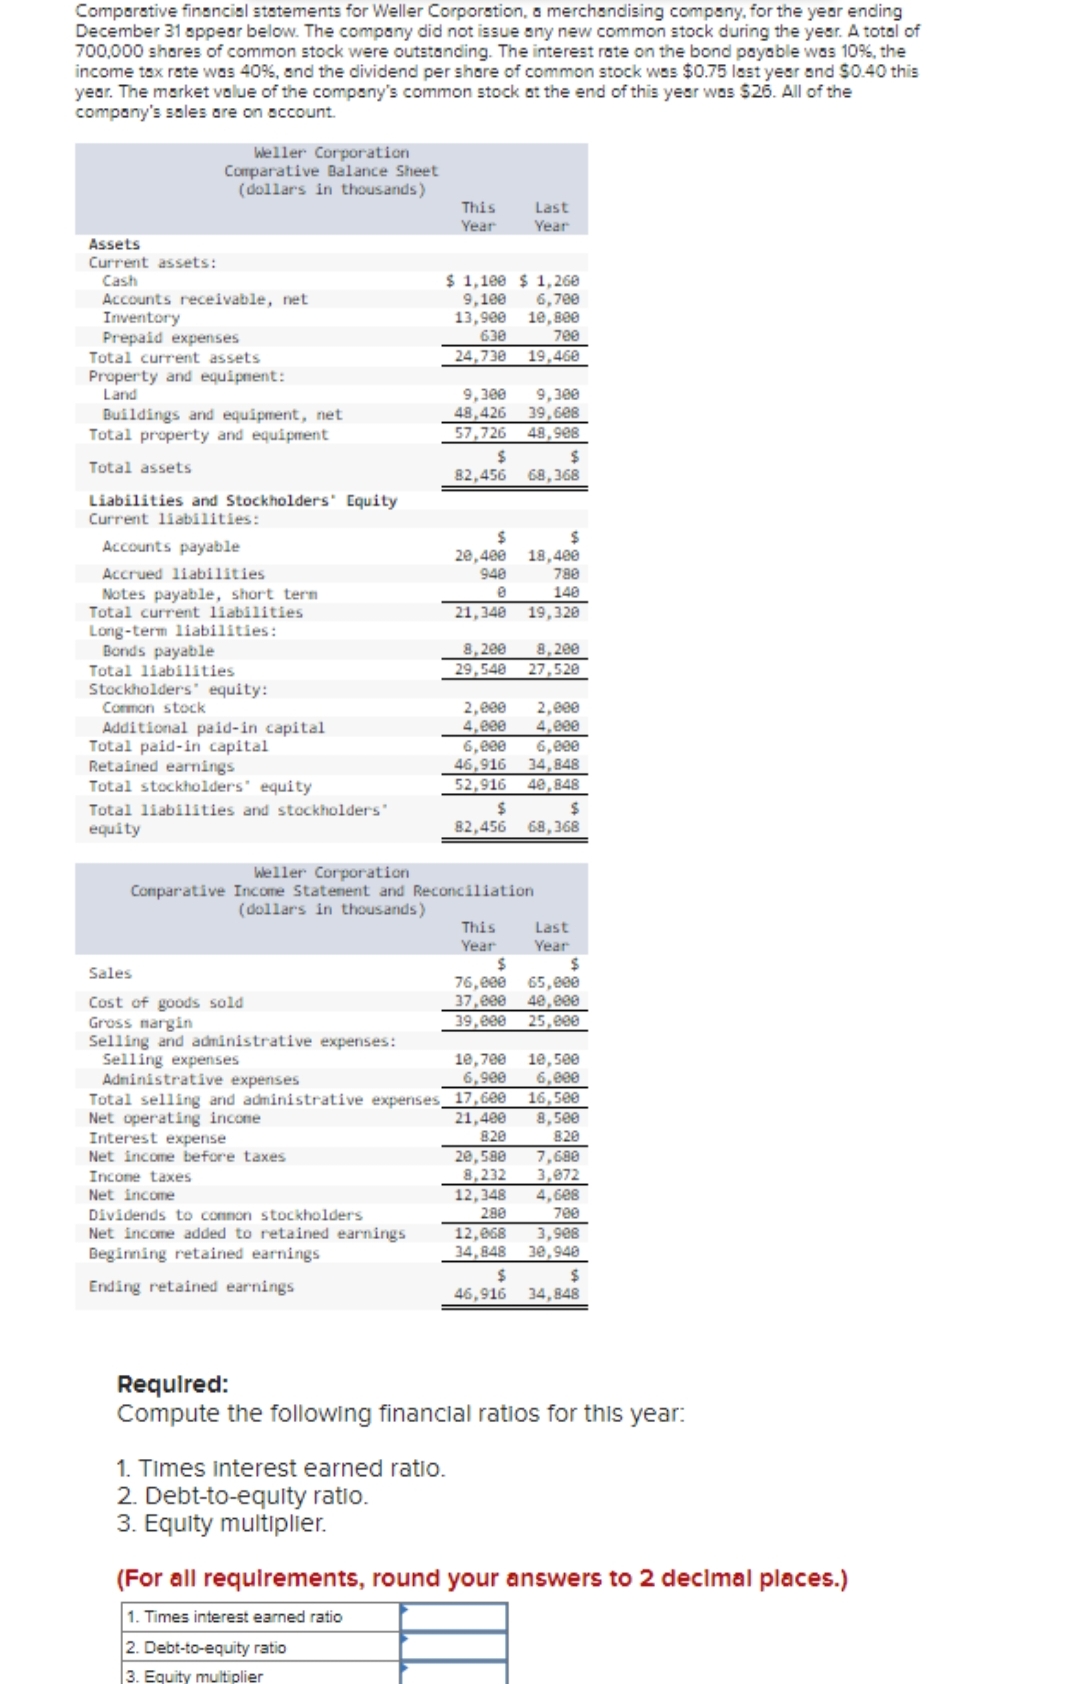 Comparative financial statements for Weller Corporation, a merchandising company, for the year ending
December 31 appear below. The company did not issue any new common stock during the year. A total of
700,000 shares of common stock were outstanding. The interest rate on the bond payable was 10%, the
income tax rate was 40%, and the dividend per share of common stock was $0.75 last year and $0.40 this
year. The market value of the company's common stock at the end of this year was $26. All of the
company's sales are on account.
Assets
Current assets:
Cash
Weller Corporation
Comparative Balance Sheet
(dollars in thousands)
Accounts receivable, net
Inventory
Prepaid expenses
Total current assets.
Property and equipment:
Land
Buildings and equipment, net
Total property and equipment
Total assets
Liabilities and Stockholders' Equity
Current liabilities:
Accounts payable
Accrued liabilities
Notes payable, short term
Total current liabilities
Long-term liabilities:
Bonds payable
Total liabilities
Stockholders equity:
Common stock
Additional paid-in capital
Total paid-in capital
Retained earnings
Total stockholders' equity
Total liabilities and stockholders'
equity
Sales
Cost of goods sold
Gross margin
Selling and administrative expenses:
Selling expenses
Interest expense
Net income before taxes
Income taxes
Net income
This
Year
Dividends to common stockholders
Net income added to retained earnings
Beginning retained earnings
Ending retained earnings
$1,100 $1,260
6,700
10,800
700
19,460
9,100
13,900
630
24,730
1. Times interest earned ratio.
2. Debt-to-equity ratio.
3. Equity multiplier.
9,300
9,300
48,426 39,608
57,726
48,908
$
82,456
$
20,400
948
0
21,340
8,200
29,540
2,000
4,000
6,000
46,916
52,916
$
82,456
Weller Corporation
Comparative Income Statement and Reconciliation
(dollars in thousands)
Administrative expenses
Total selling and administrative expenses 17,600
Net operating income
21,400
820
20,580
8,232
This
Year
10,700
6,900
Last
Year
$
68,368
12,068
34,848
$
18,400
780
140
19,320
$
46,916
8,200
27,520
2,000
4,000
6,000
34,848
40,848
$
$
65,000
76,000
37,000 40,000
39,000
25,000
$
68,368
Last
Year
10,500
6,000
7,680
3,072
12,348 4,608
280
700
16,500
8,500
820
3,908
30,940
$
34,848
Required:
Compute the following financial ratios for this year:
(For all requirements, round your answers to 2 decimal places.)
1. Times interest earned ratio
2. Debt-to-equity ratio
3. Equity multiplier